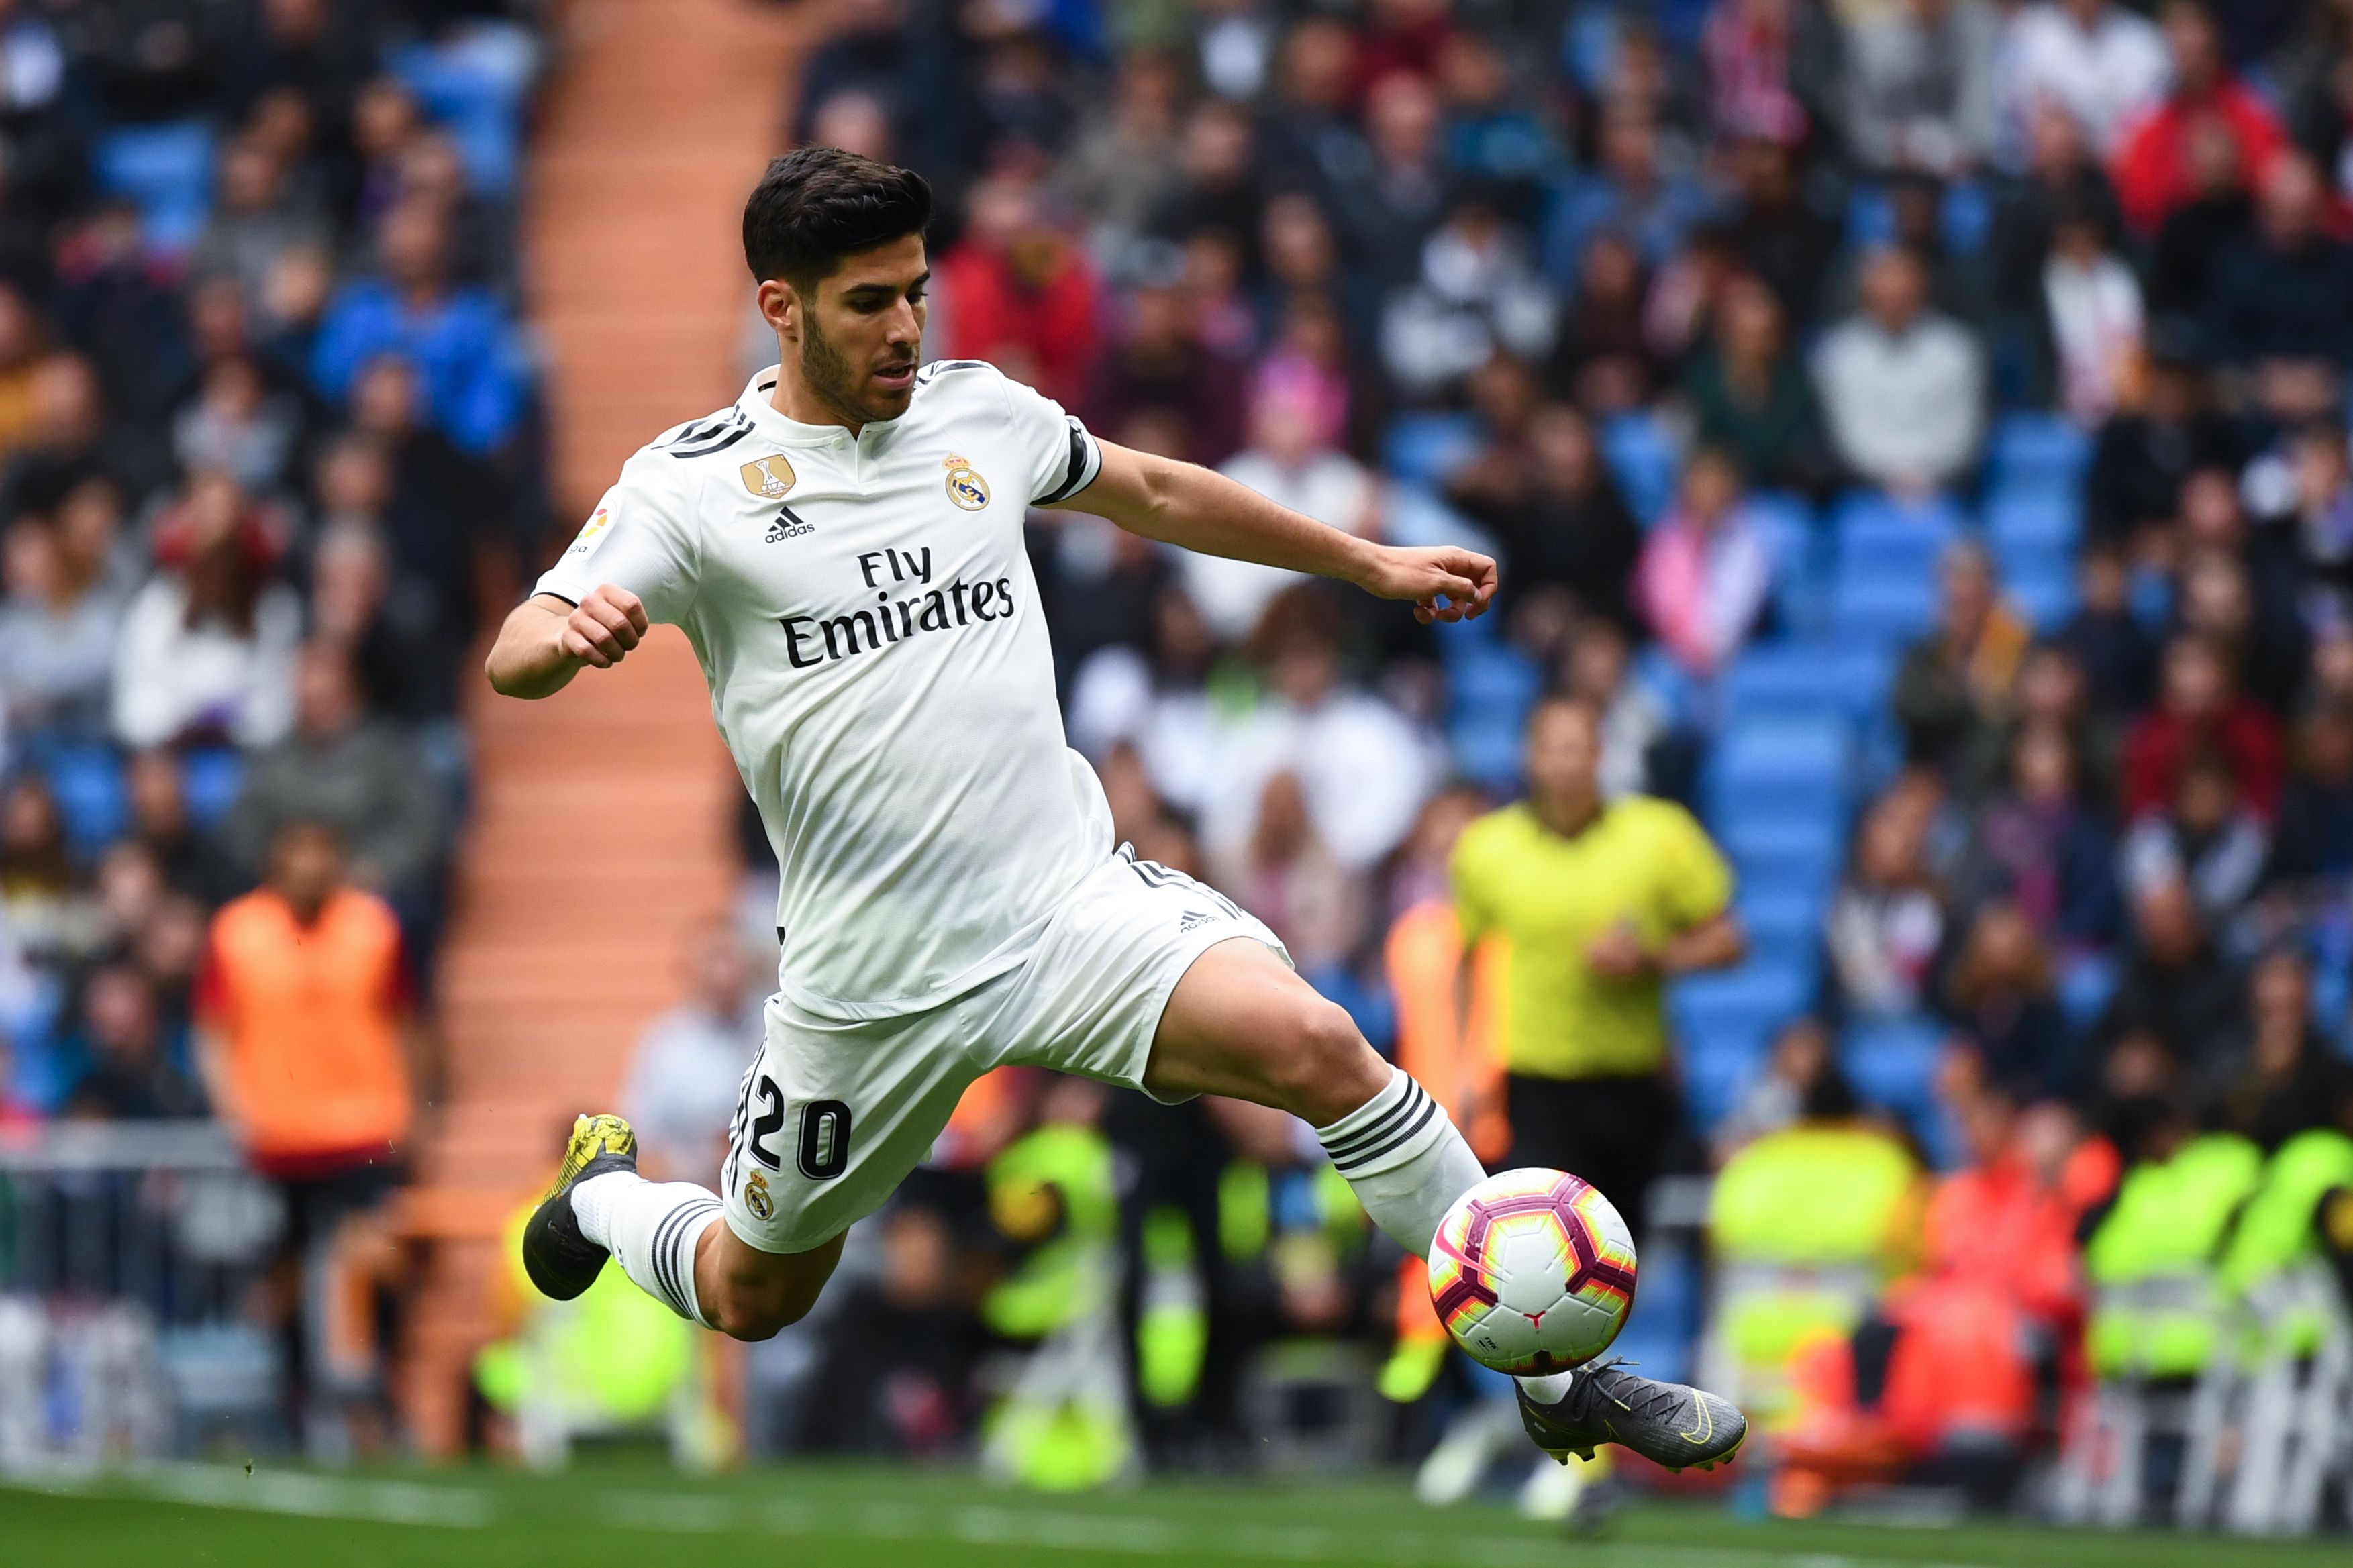 Time up for Asensio in Madrid? (Photo courtesy: AFP/Getty)